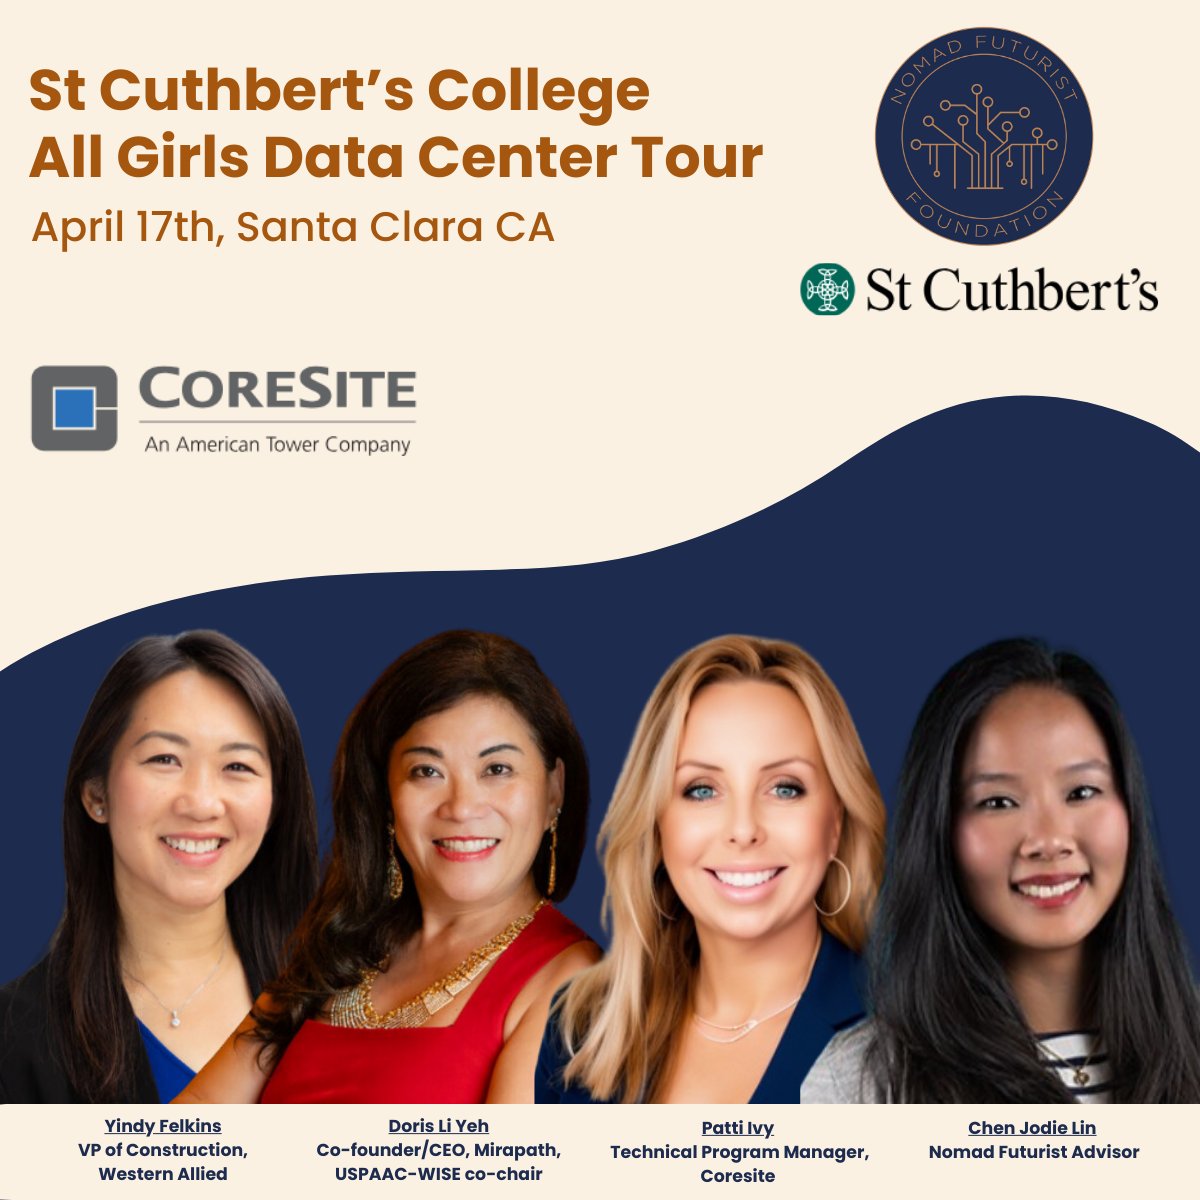 #NomadFuturist Foundation is excited to announce that we will be co-hosting with @CoreSite the first all-girls data center tour with #StCuthbertsCollege from Auckland, New Zealand 🎉
.
#DataCenters #DigitalInfrastructure #CloudComputing #TheFutureisNow #HelloTomorrow